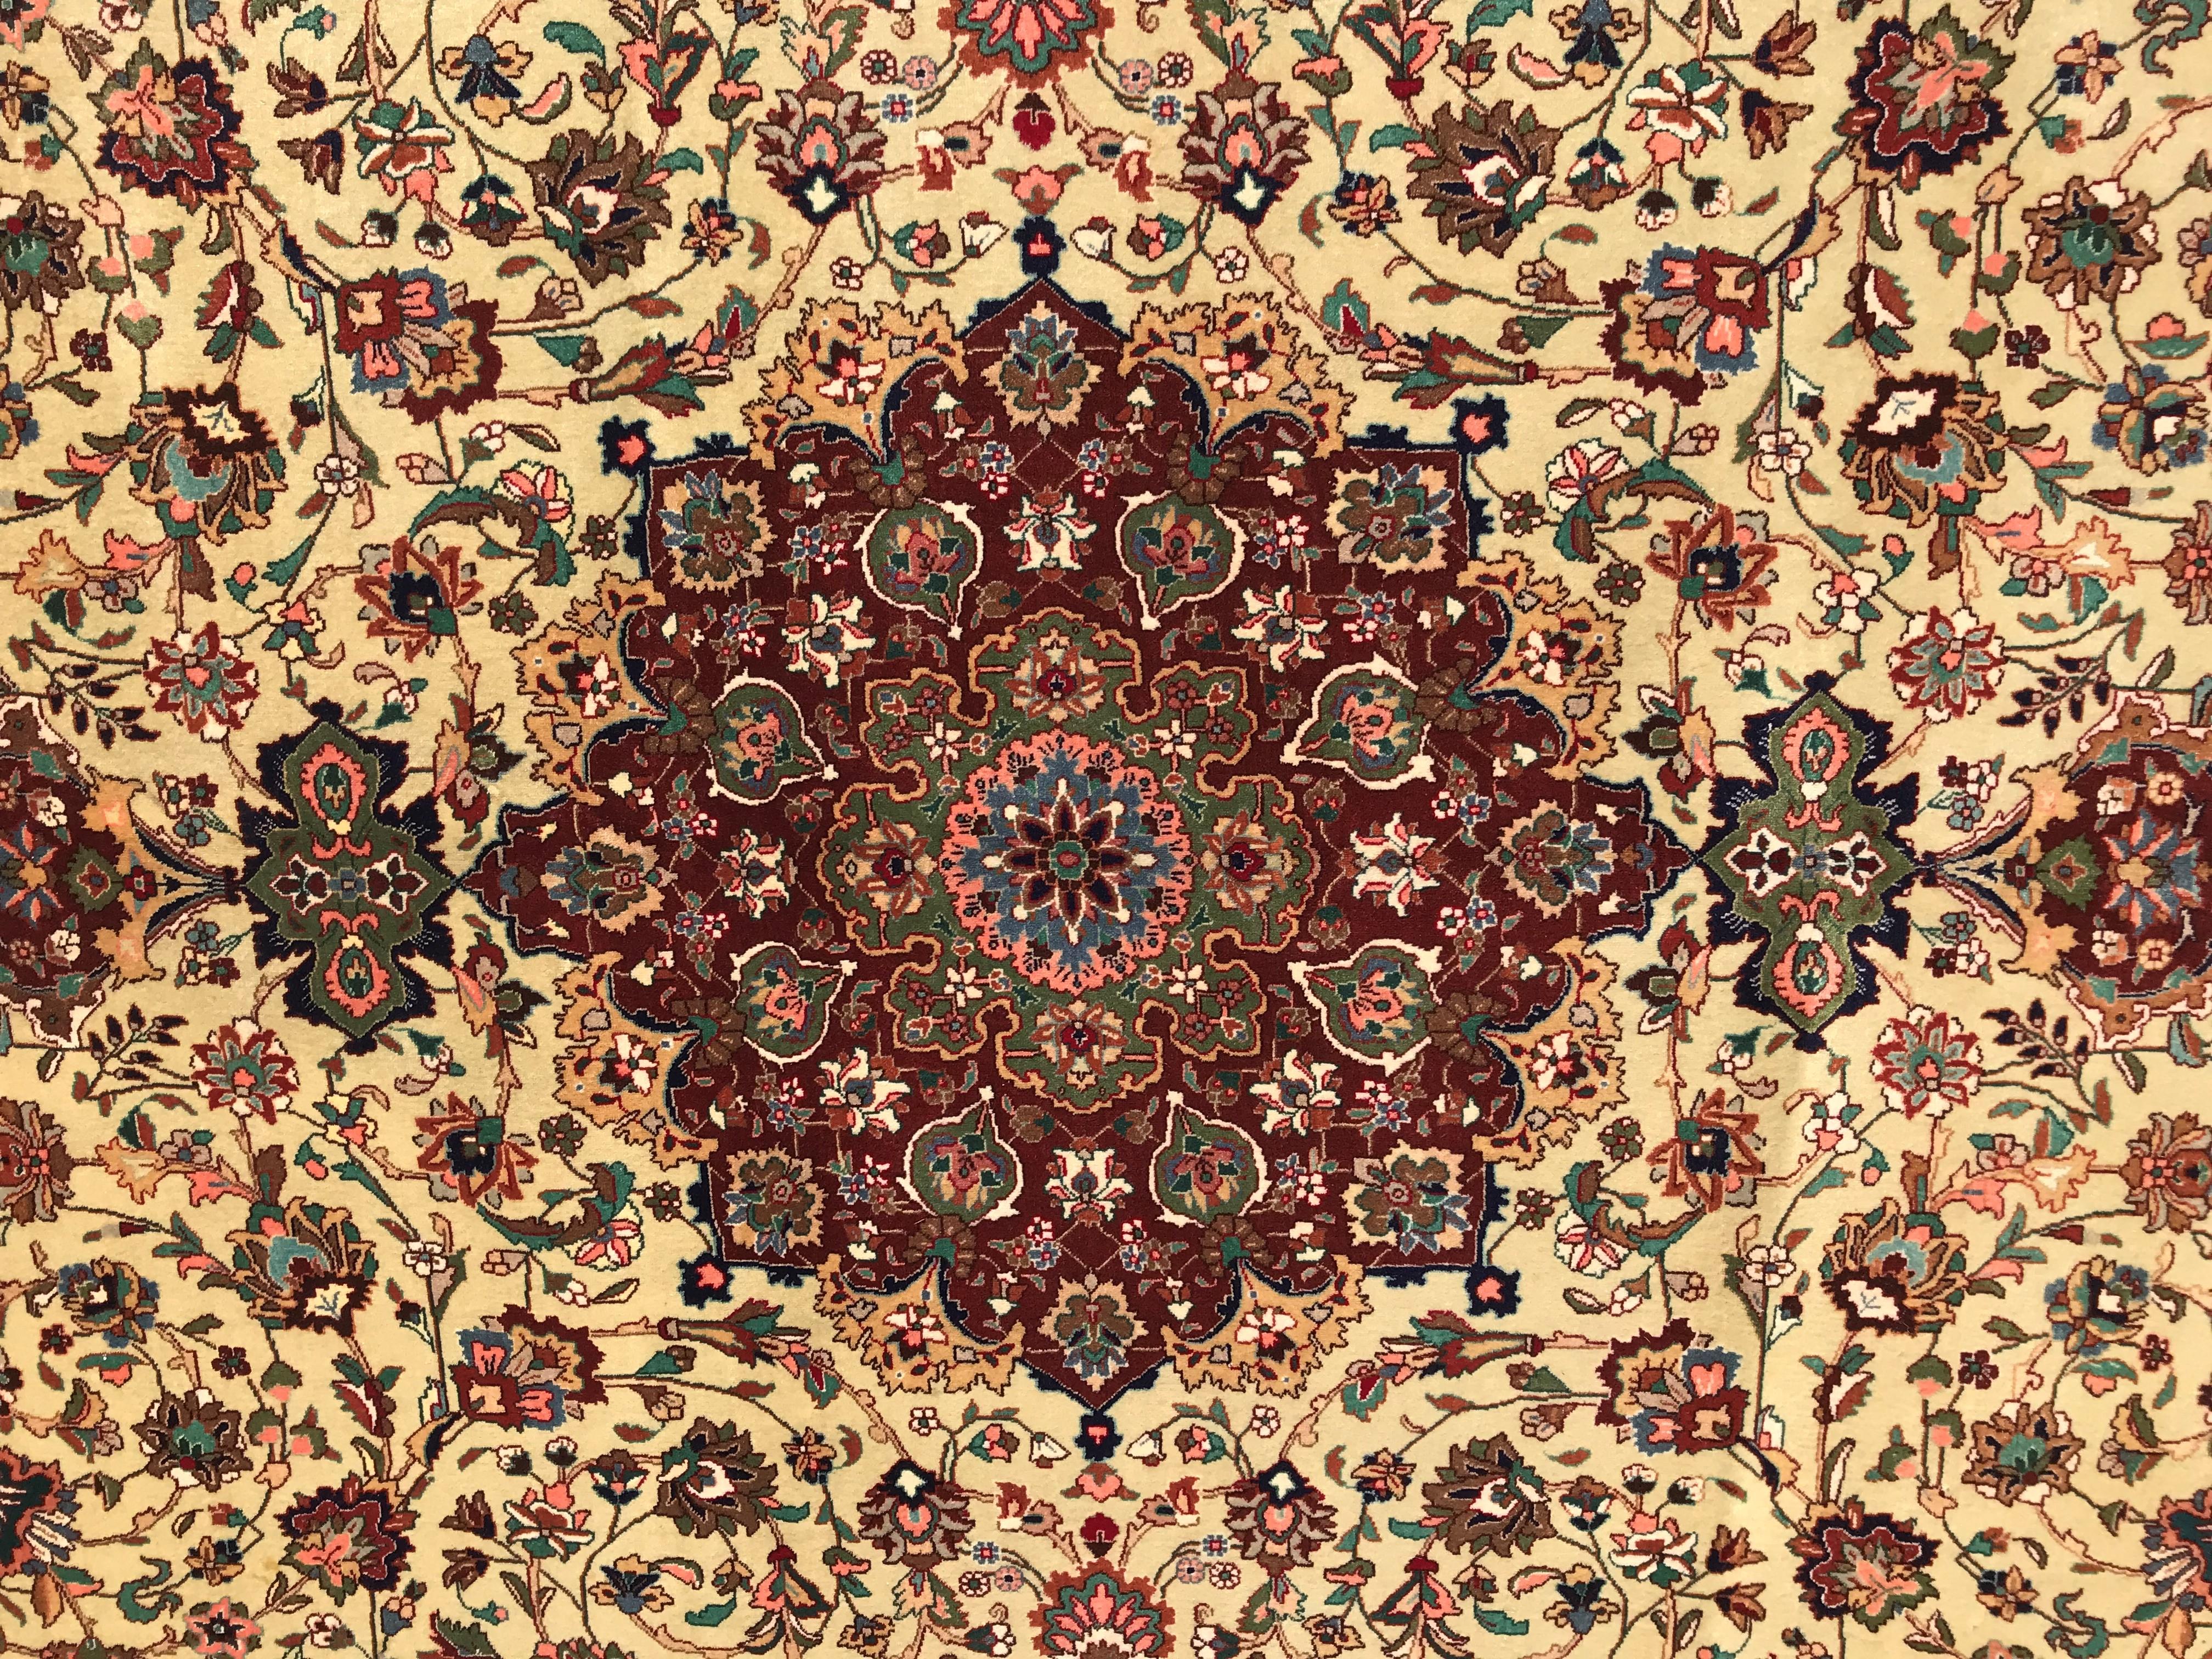 Hand-Woven Handwoven Tabriz Persian Wool Rug with Central Medallion, circa 1960